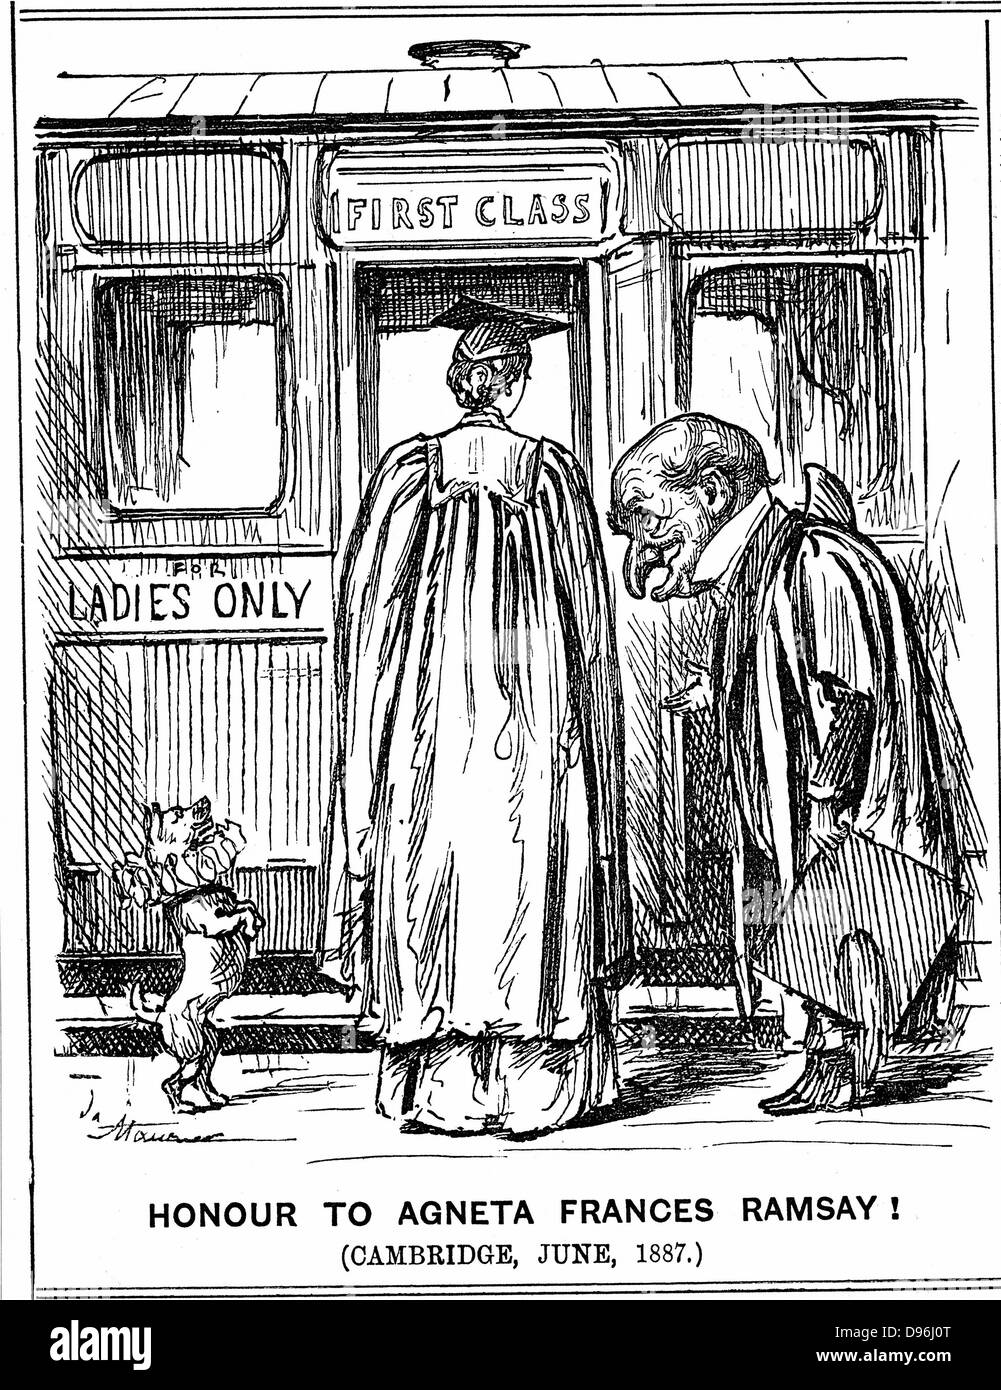 Mr Punch bows to Agneta Frances Ramsay who sat, and passed with First Class Honours, the papers set, but could not receive a degree as Cambridge did not award them to women at this time. George du Maurier cartoon from 'Punch', London, 2 July 1887. Engraving Stock Photo